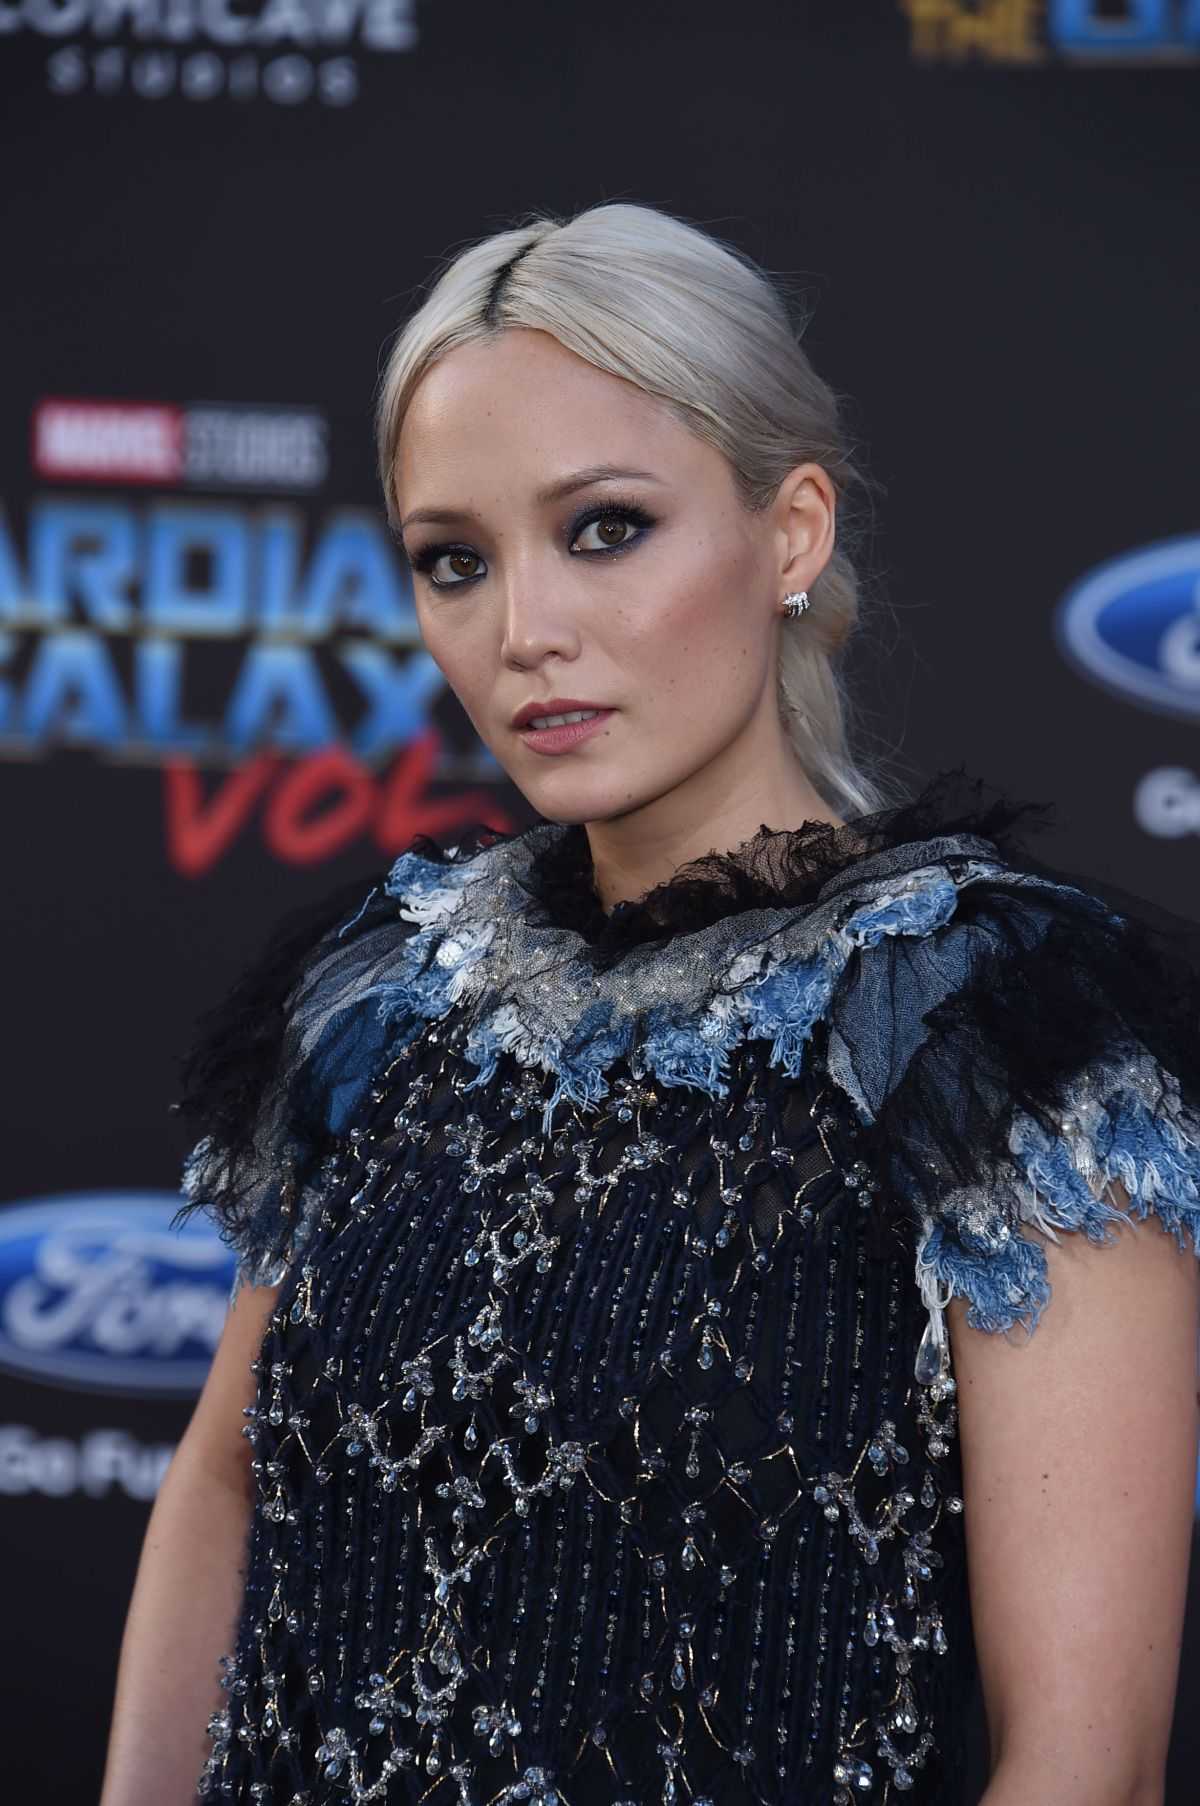 70+ Hot Pictures Of Pom Klementieff Who Plays Mantis In Marvel Cinematic Universe 150